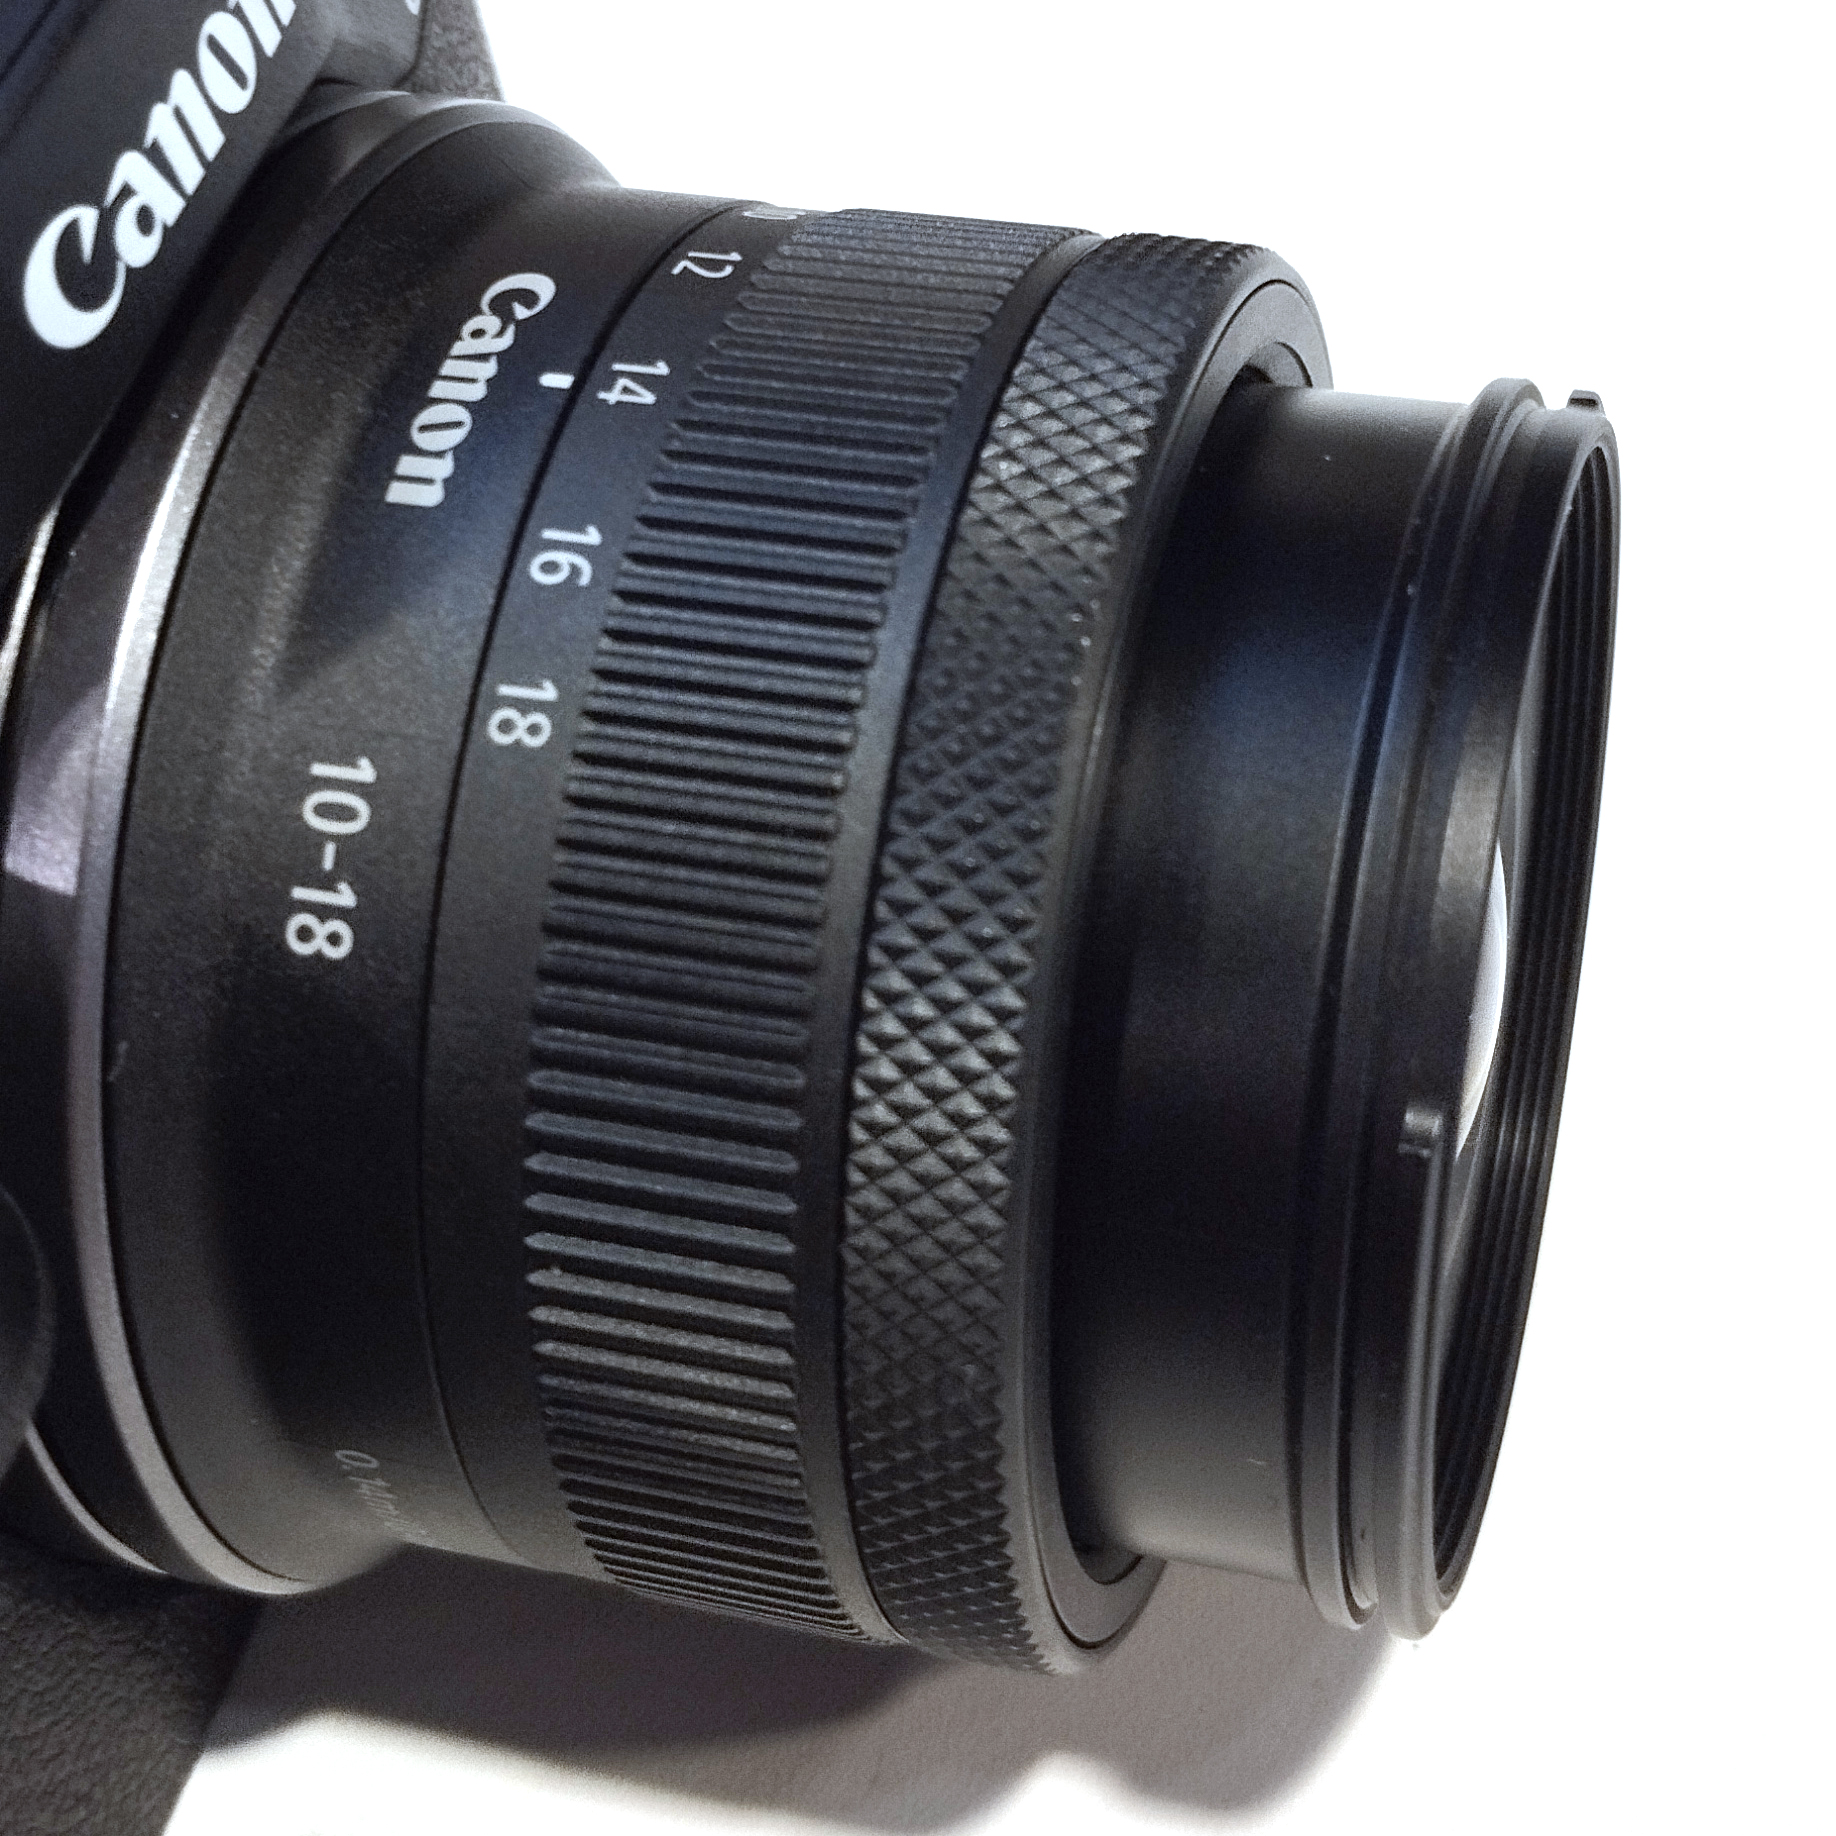 rfs1018l04 - Here is the unannounced Canon RF-S 10-18mm f/4.5-6.3 IS STM